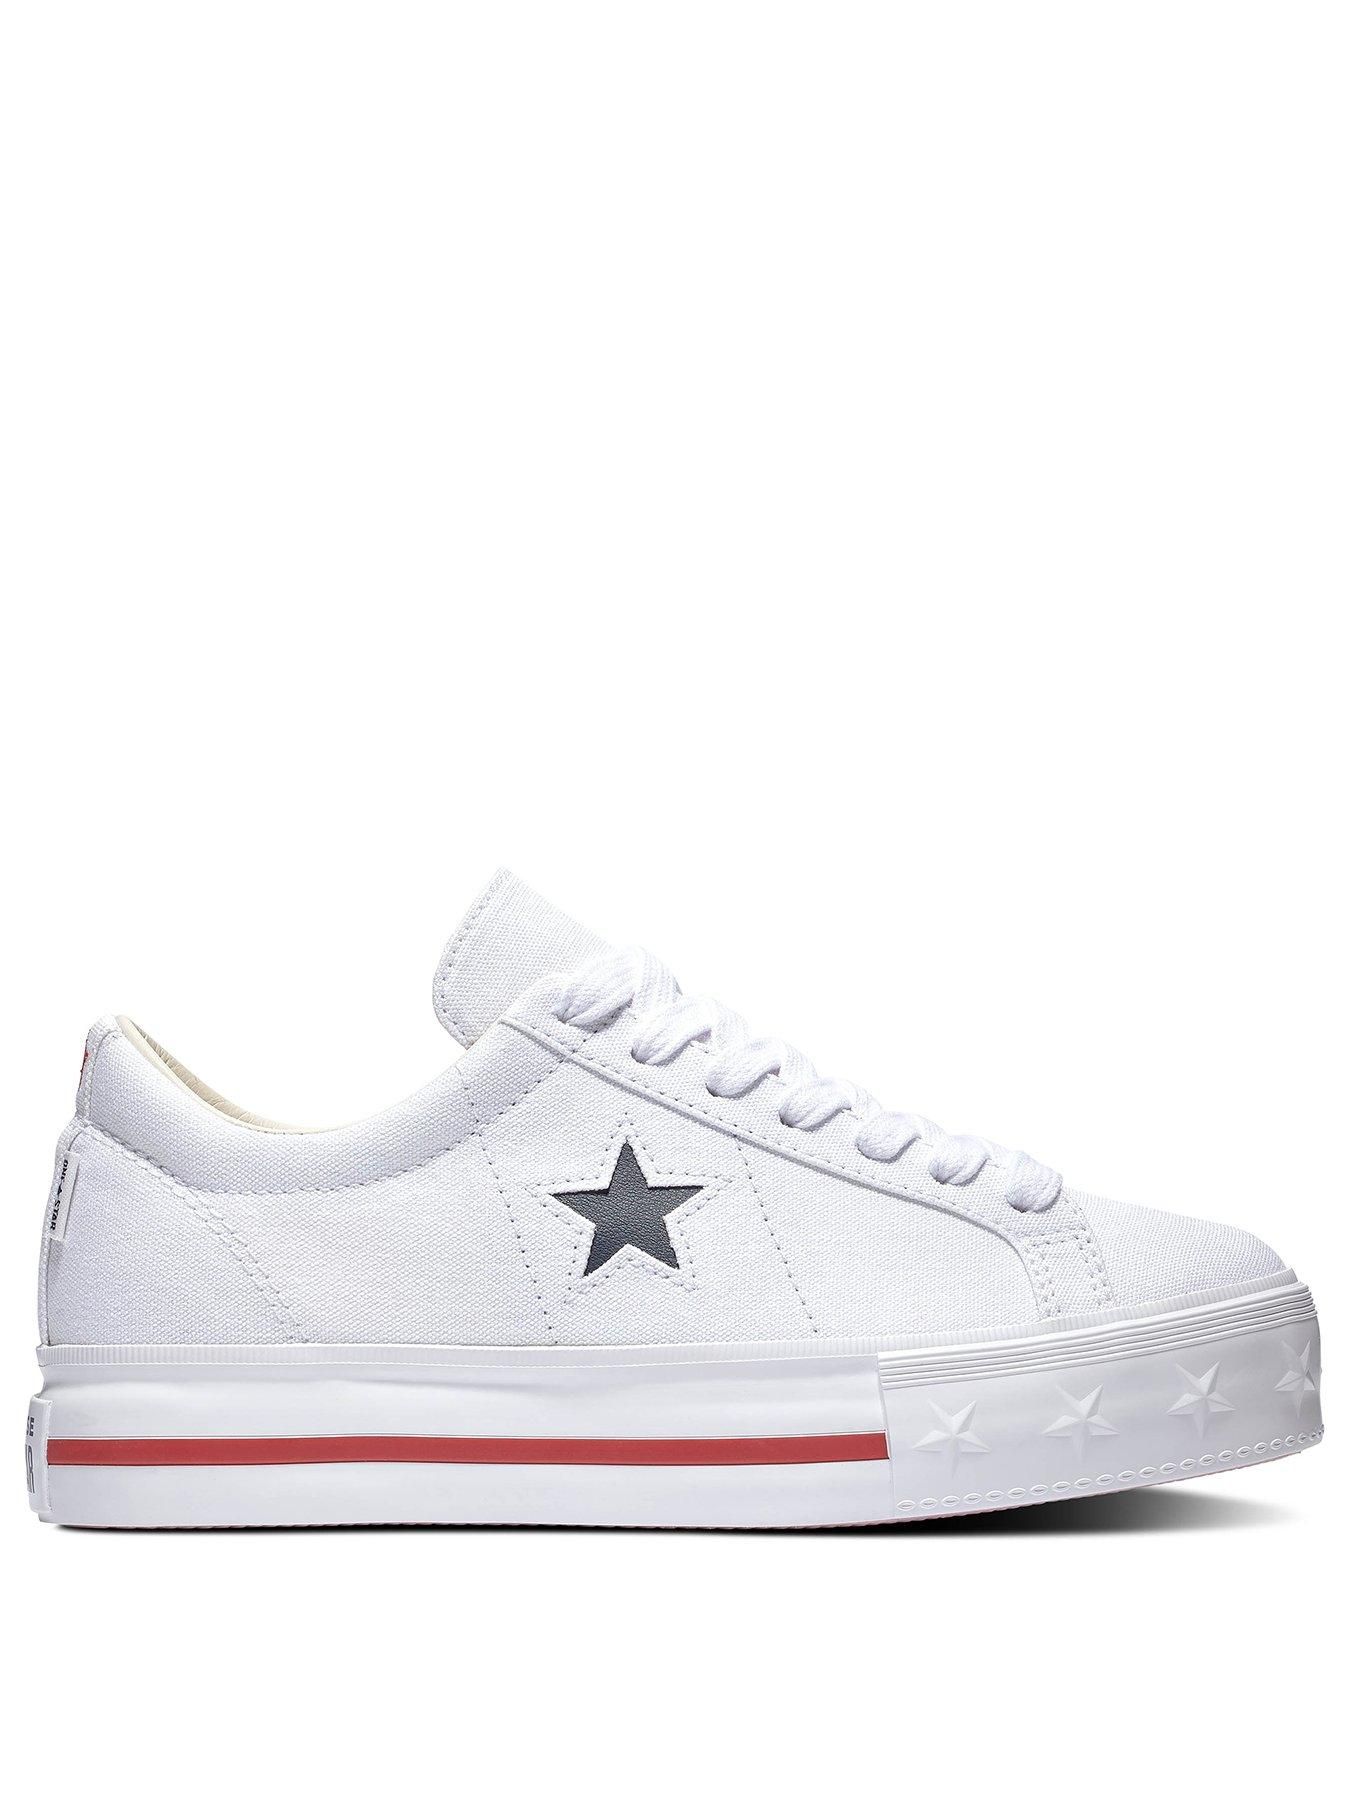 converse one star lift white